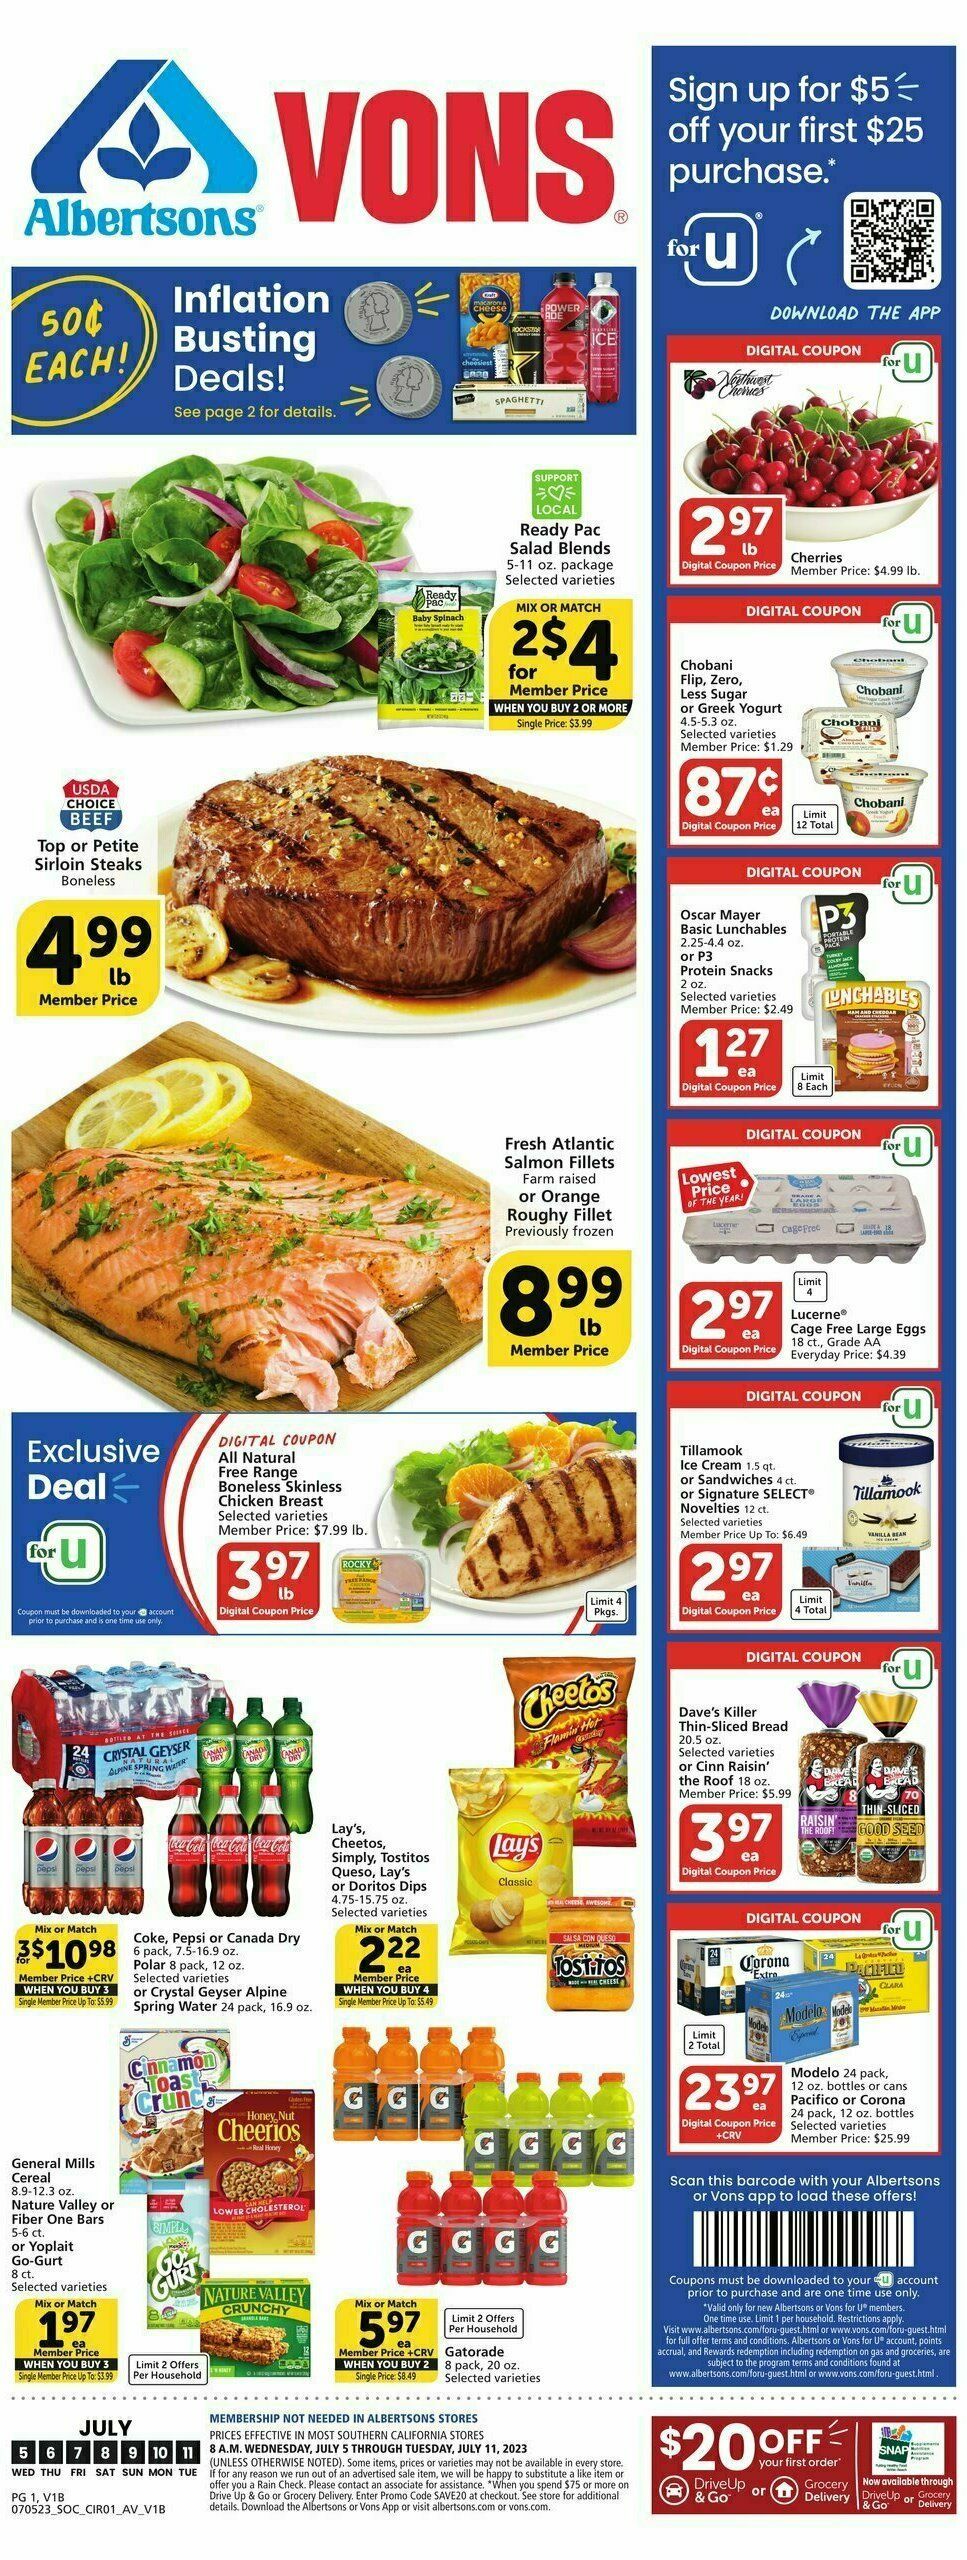 Vons Weekly Ad from July 5